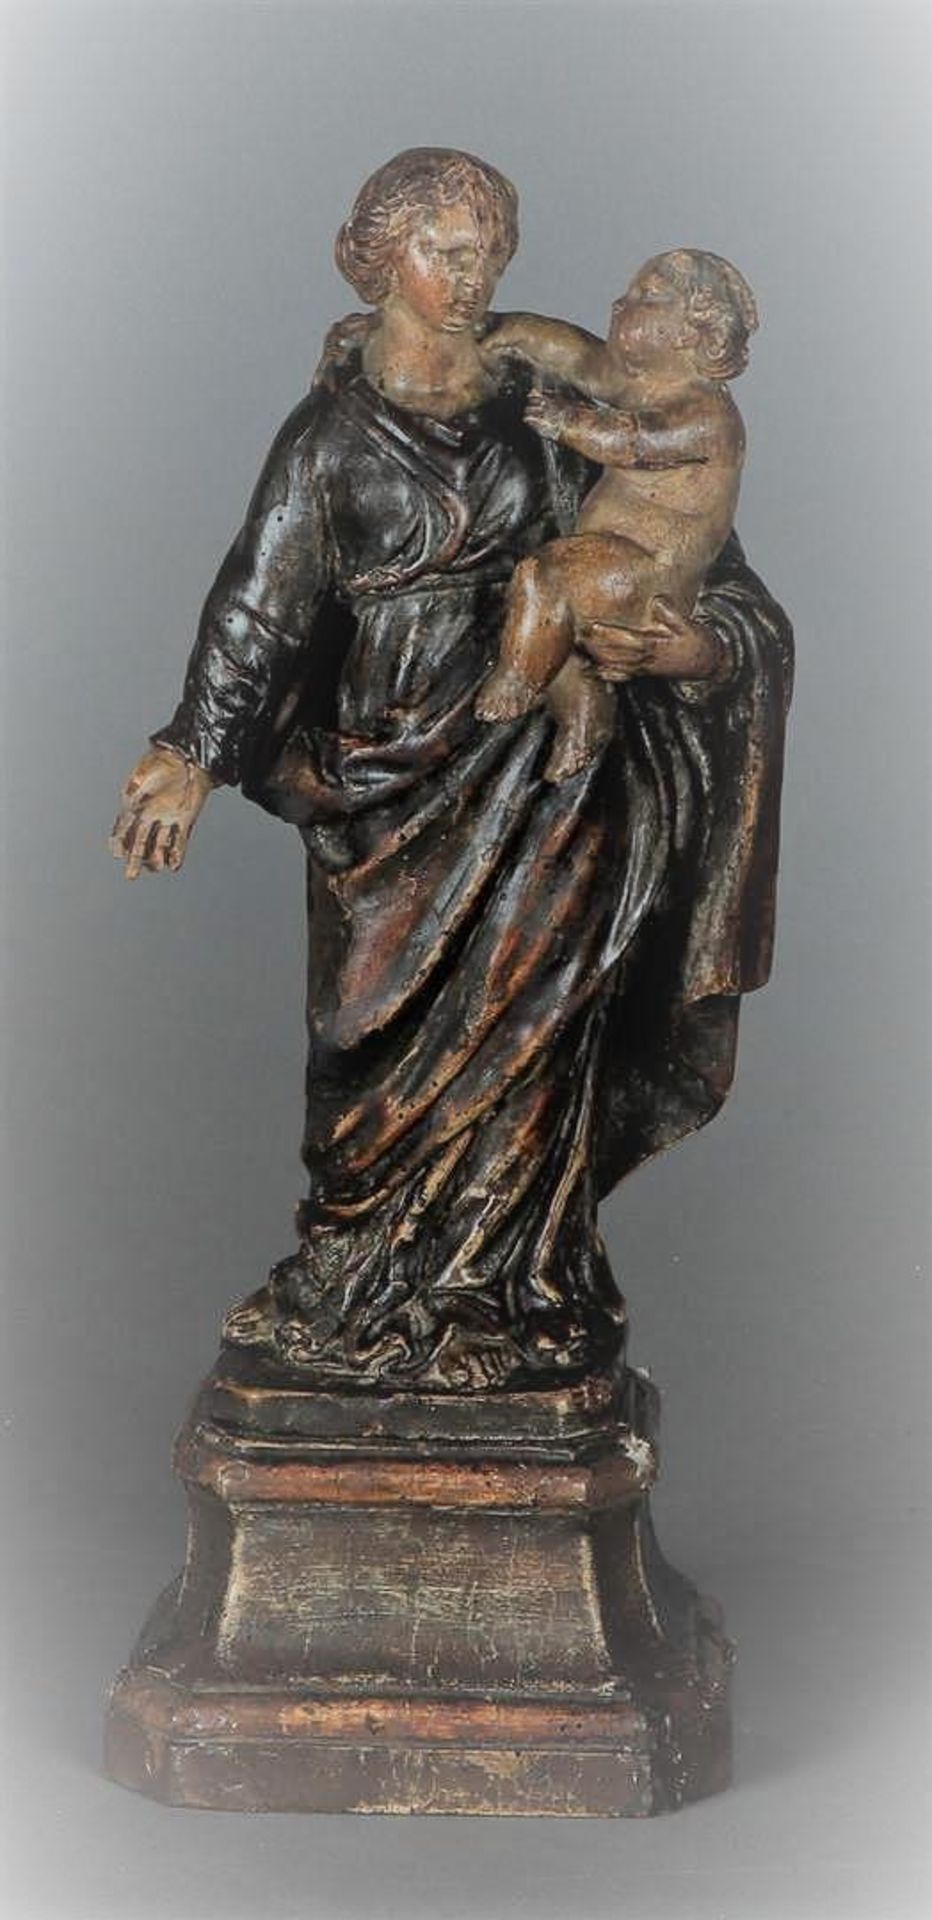 A wooden polychrome statue, Madonna with child. Possibly Antwerp 17th/18th century.